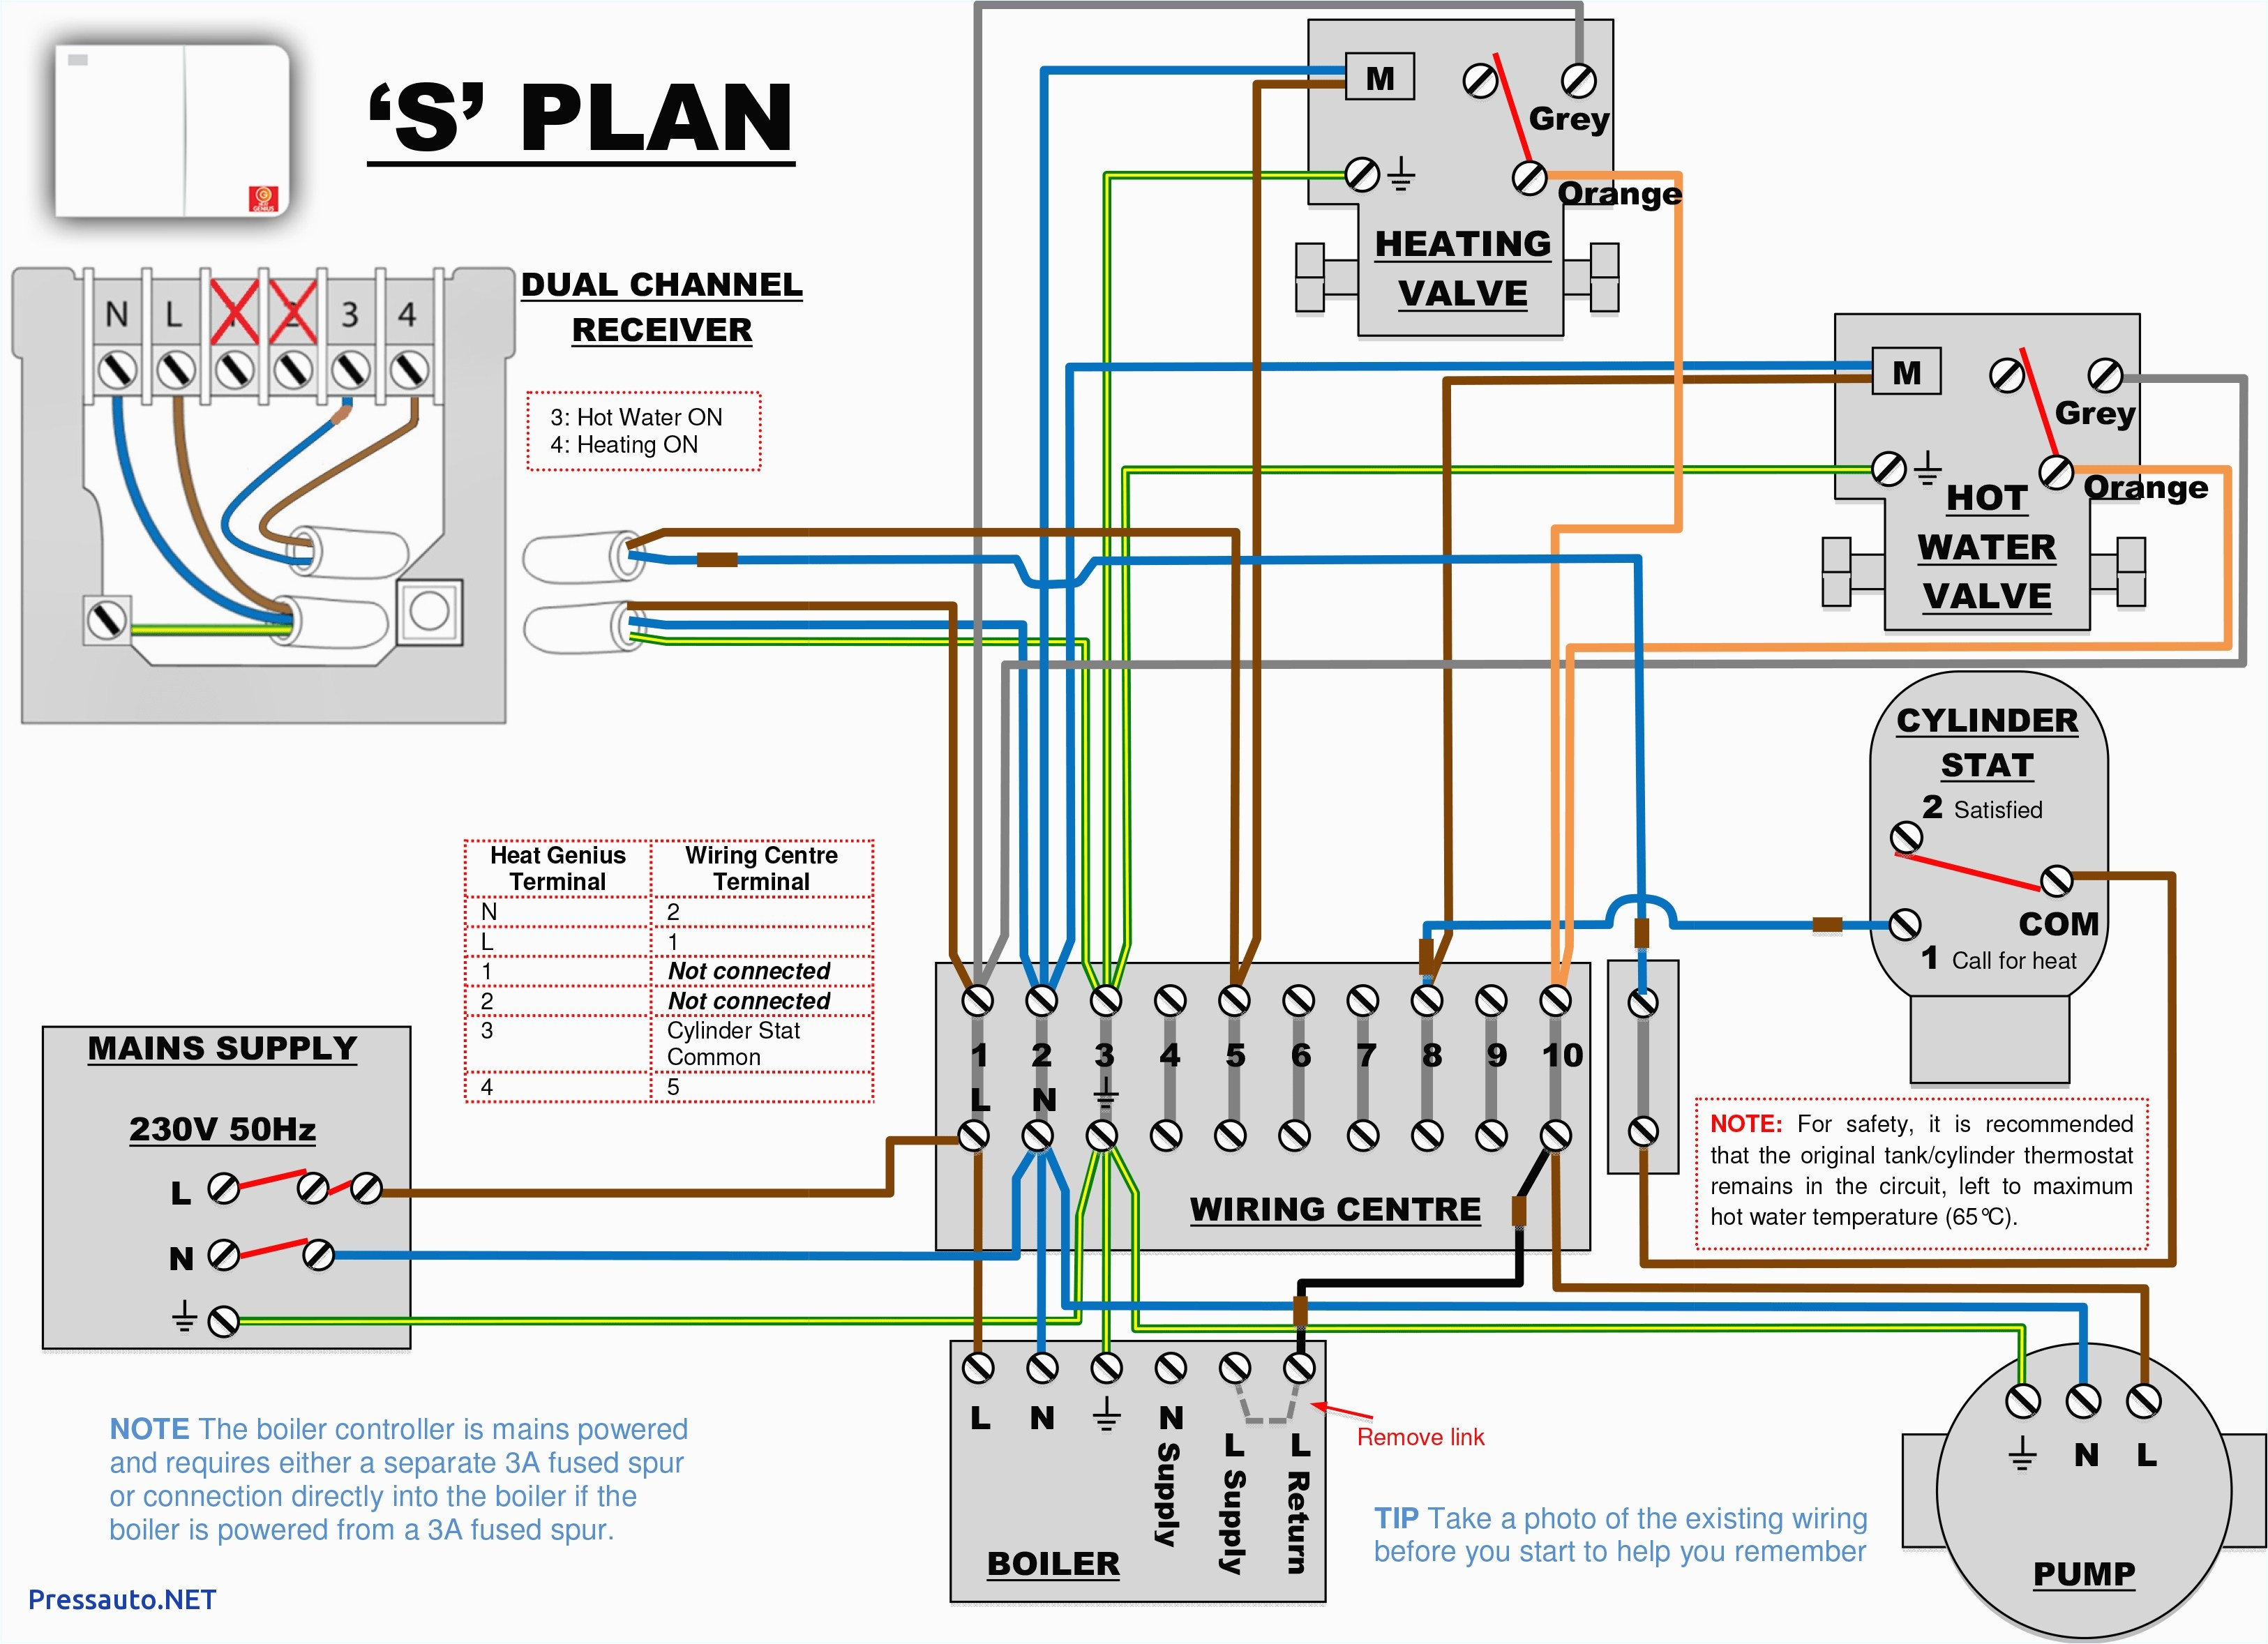 carrier infinity thermostat wiring wiring diagram mega carrier infinity system thermostat wiring diagram carrier infinity thermostat wiring